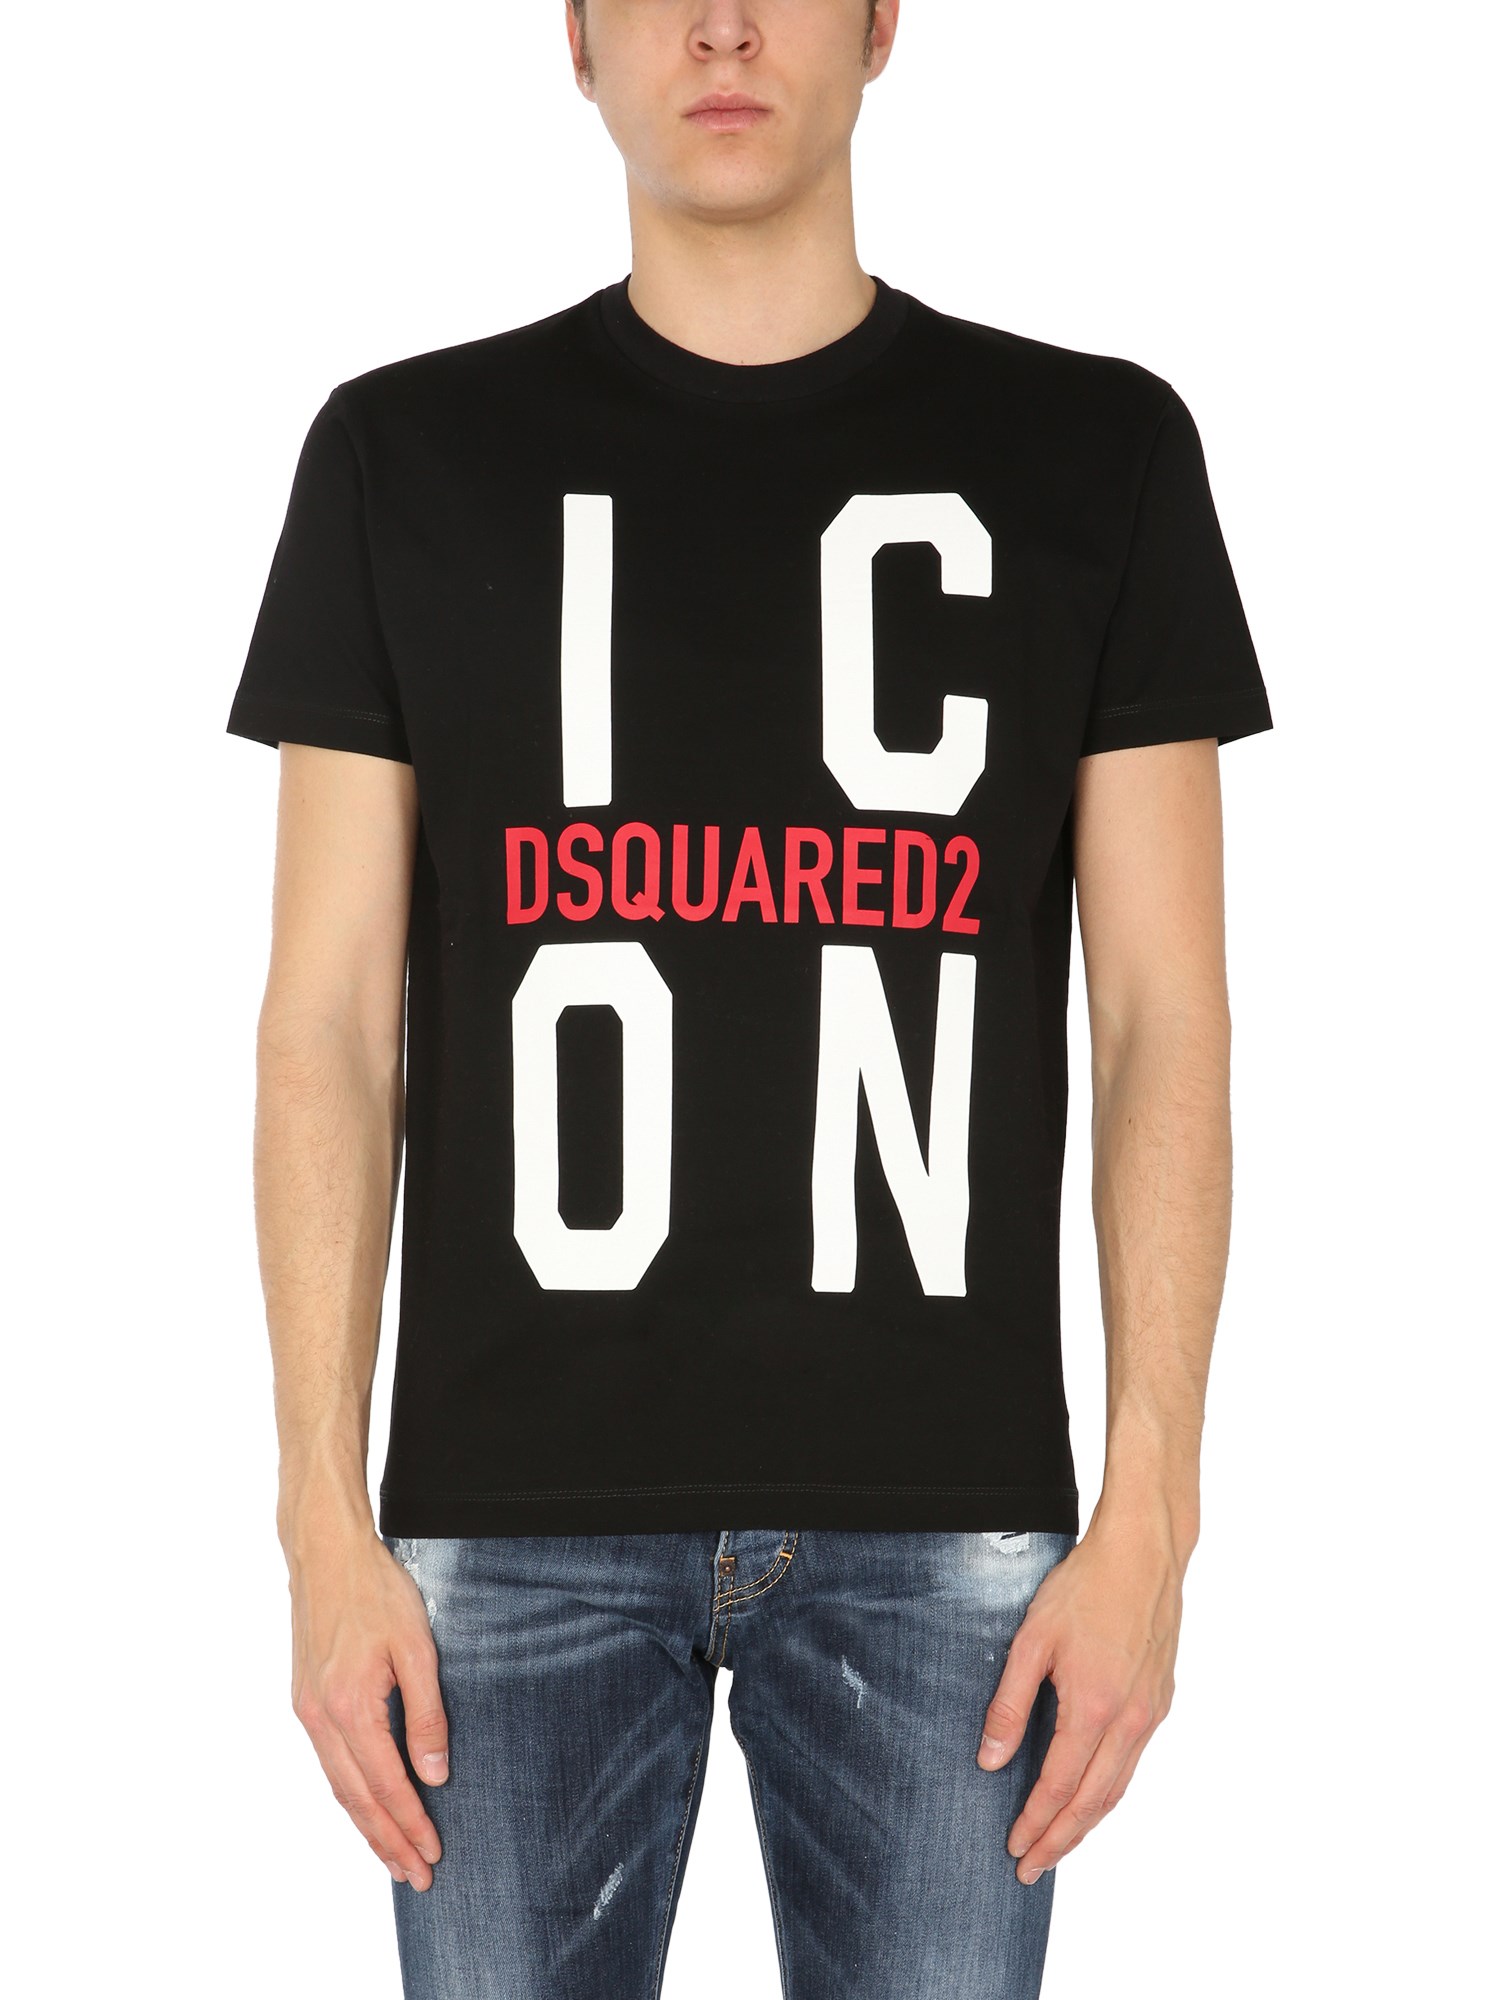 DSQUARED2 T-SHIRT WITH LOGO,202898